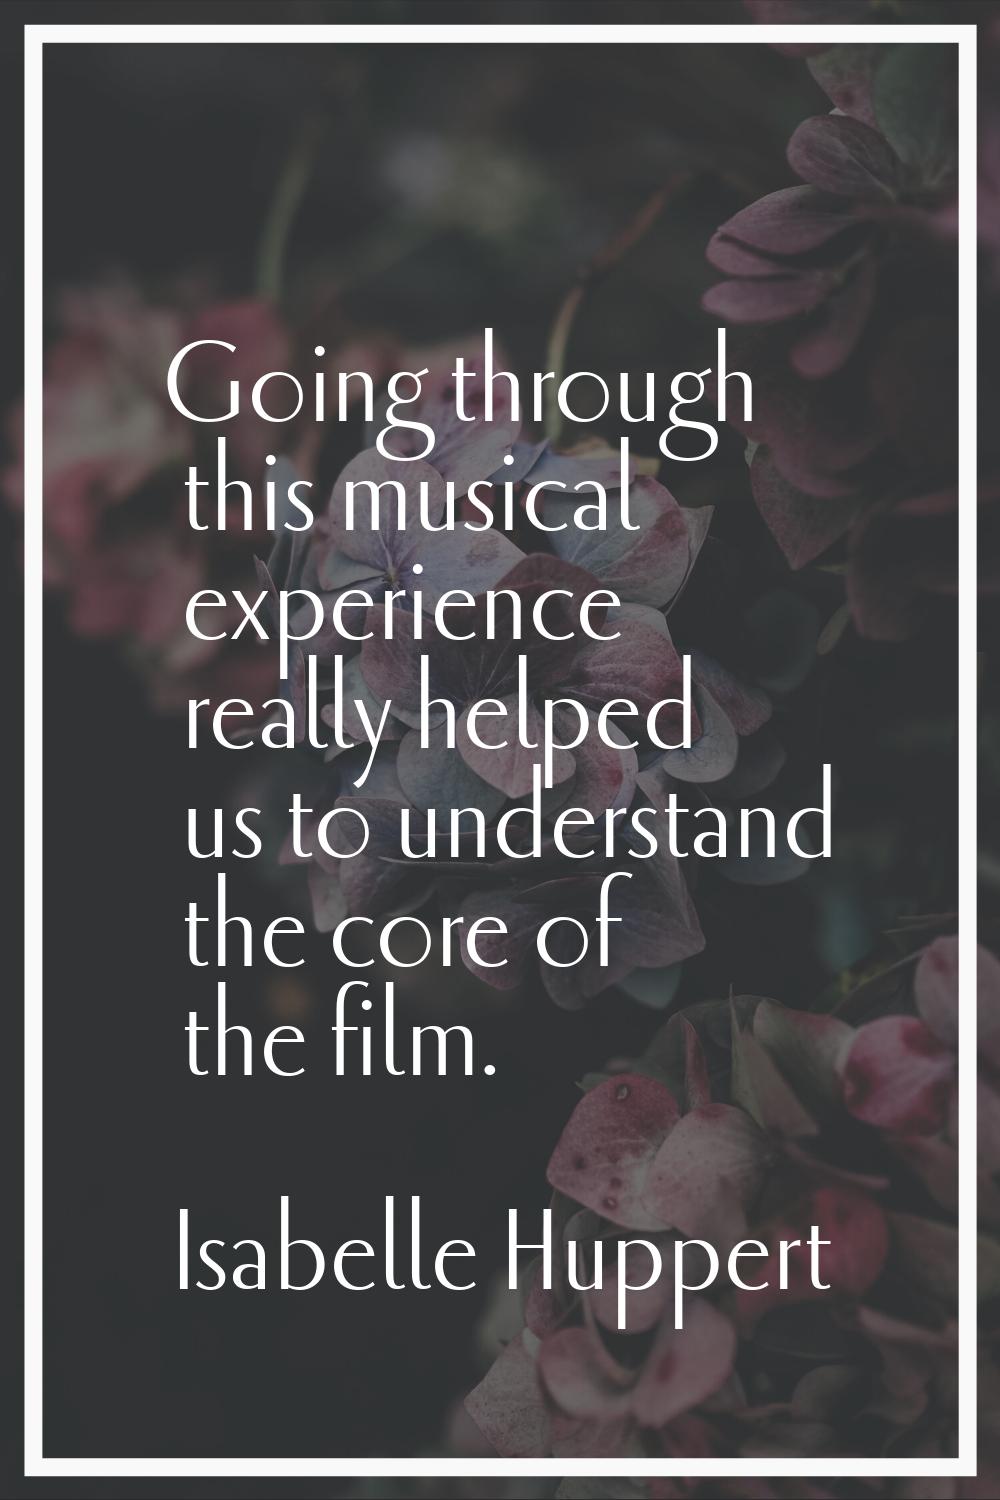 Going through this musical experience really helped us to understand the core of the film.